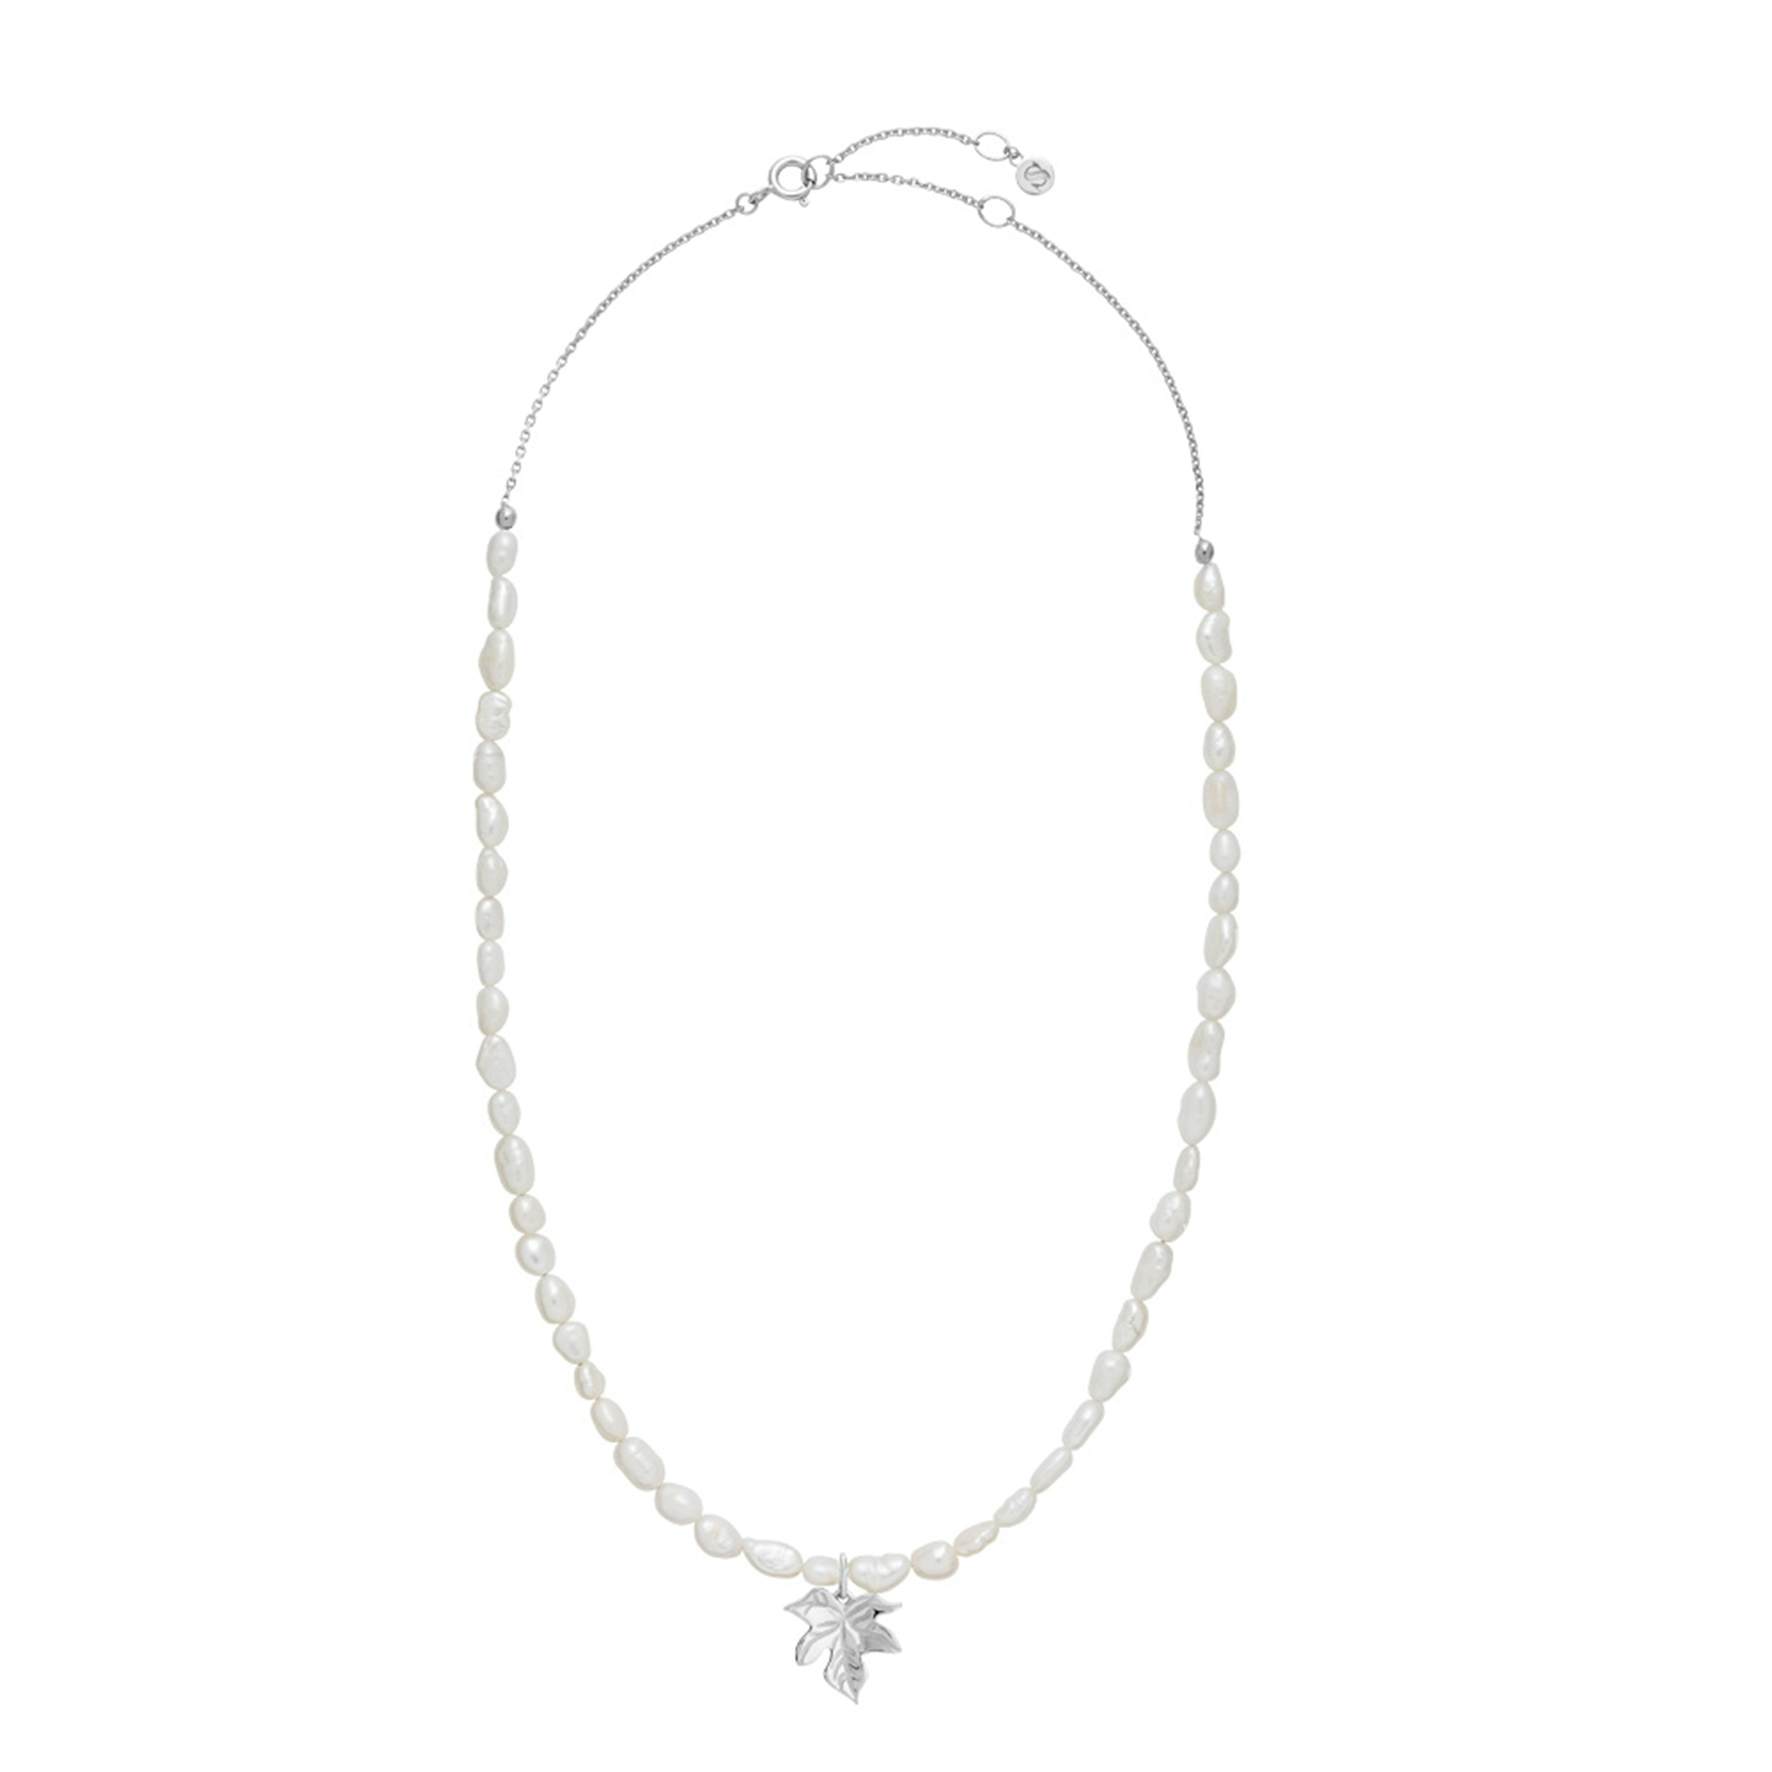 Caley Pearl Necklace von Izabel Camille in Silber Sterling 925